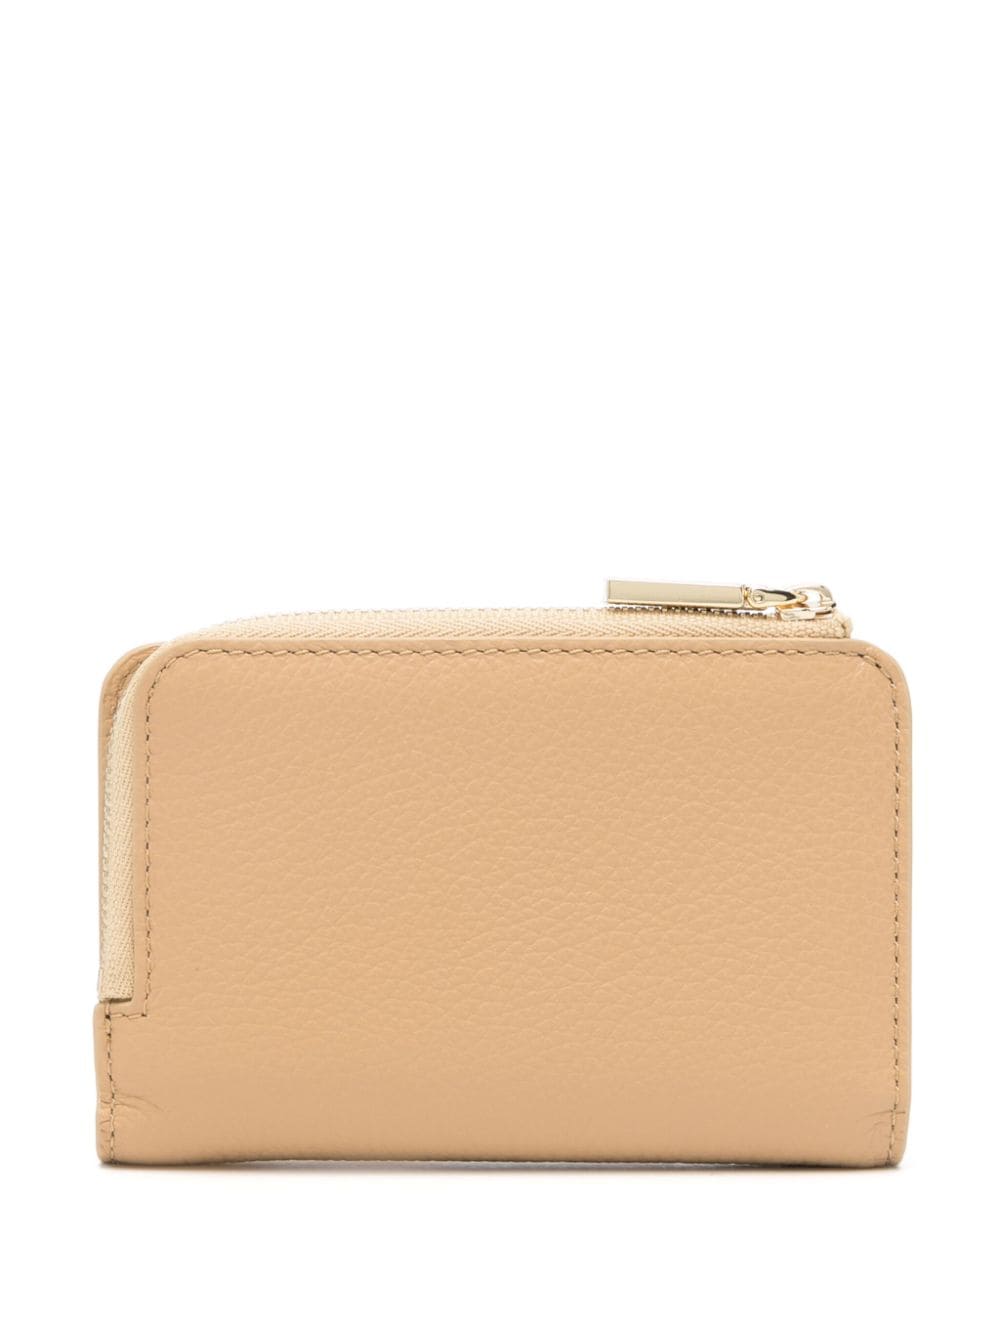 Coccinelle small Metallic Soft leather wallet - N24 FRESH BEIGE